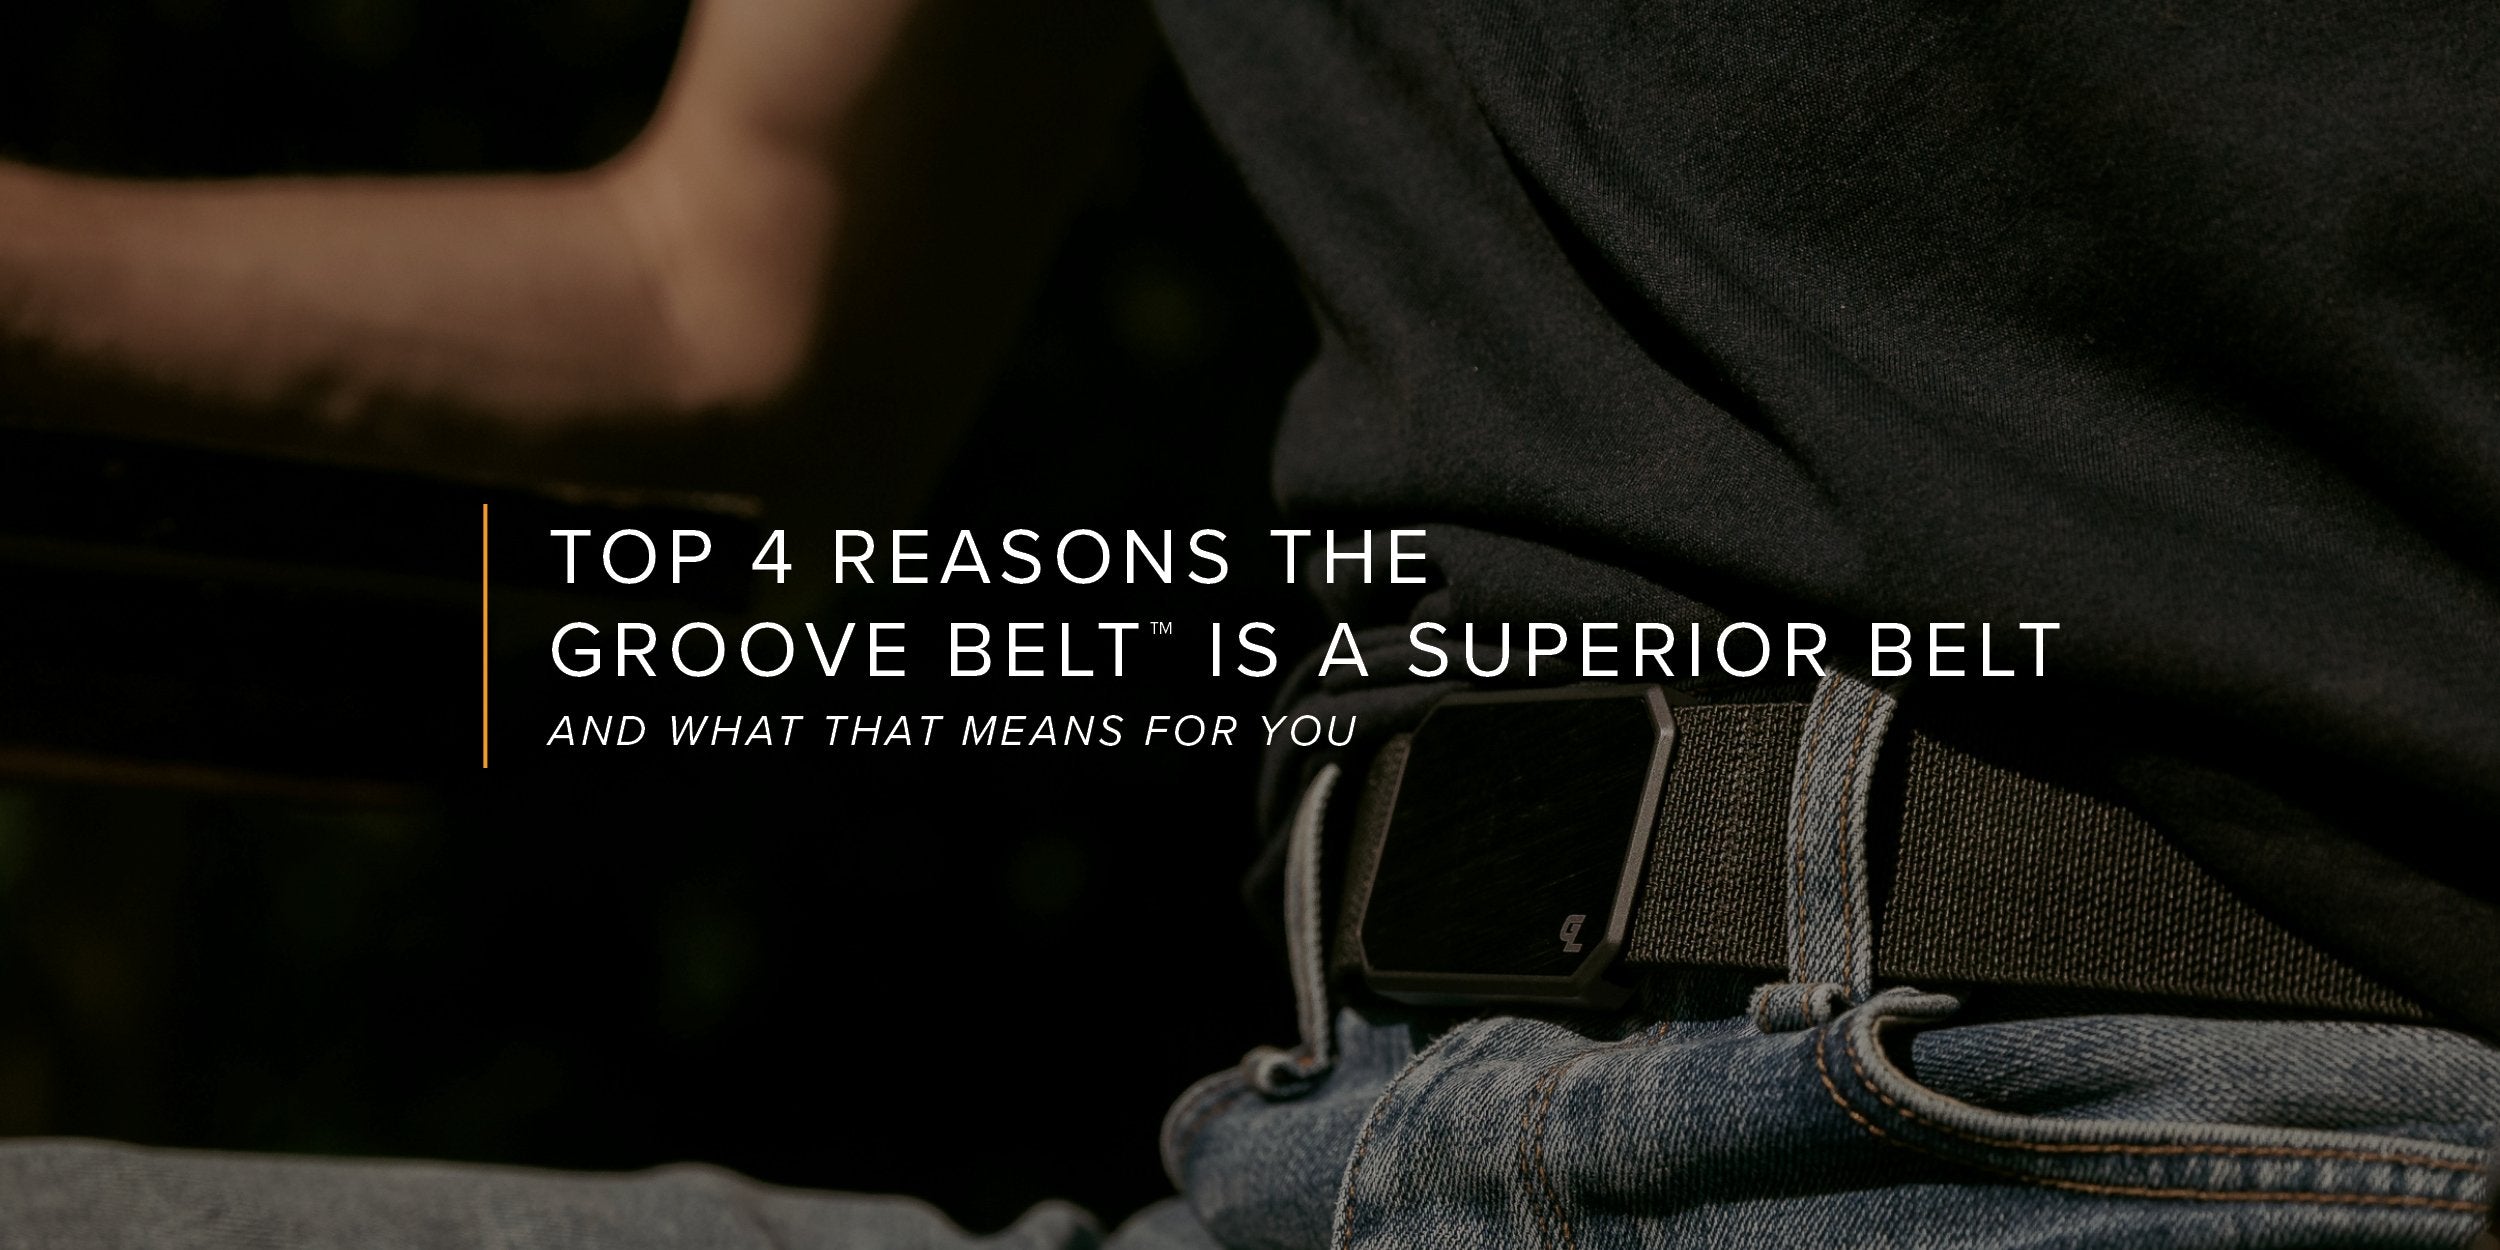 Top 4 Reasons the Groove Belt™ is a Superior Belt